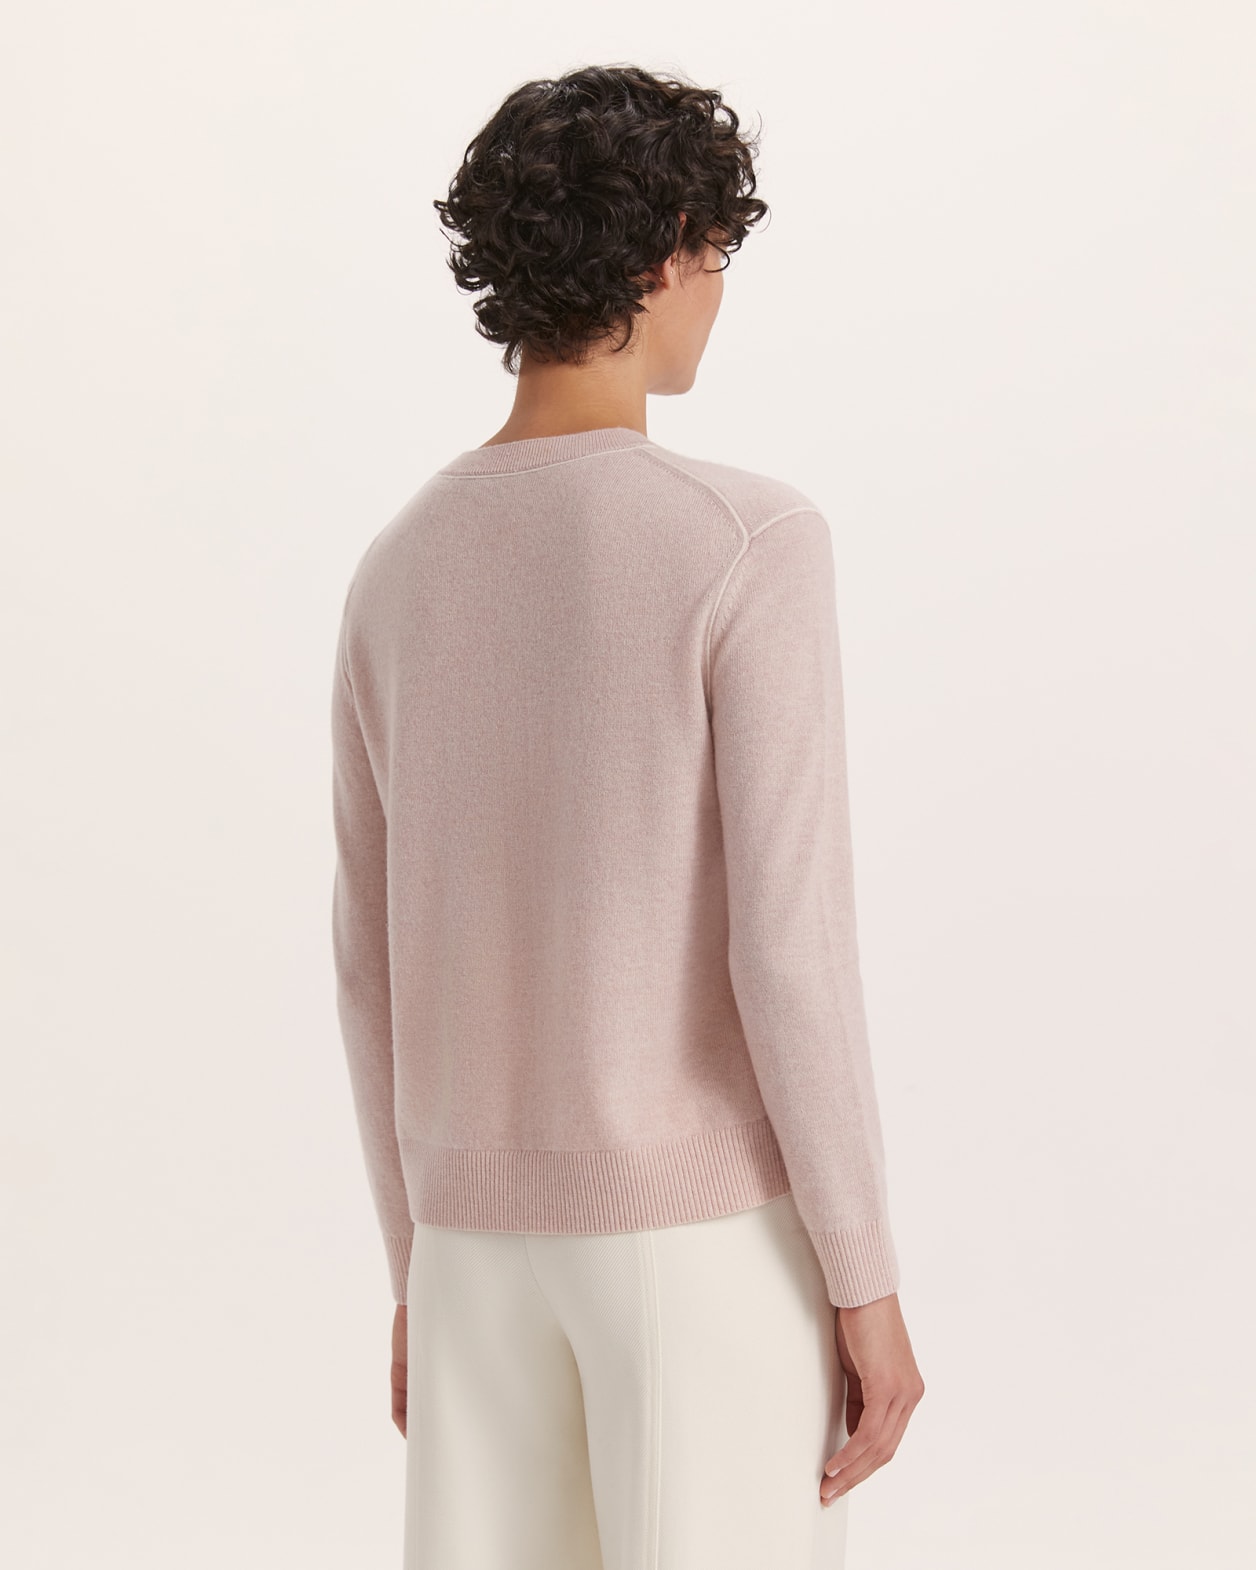 Nora Wool Cashmere Contrast Sweater in DUSTY ROSE